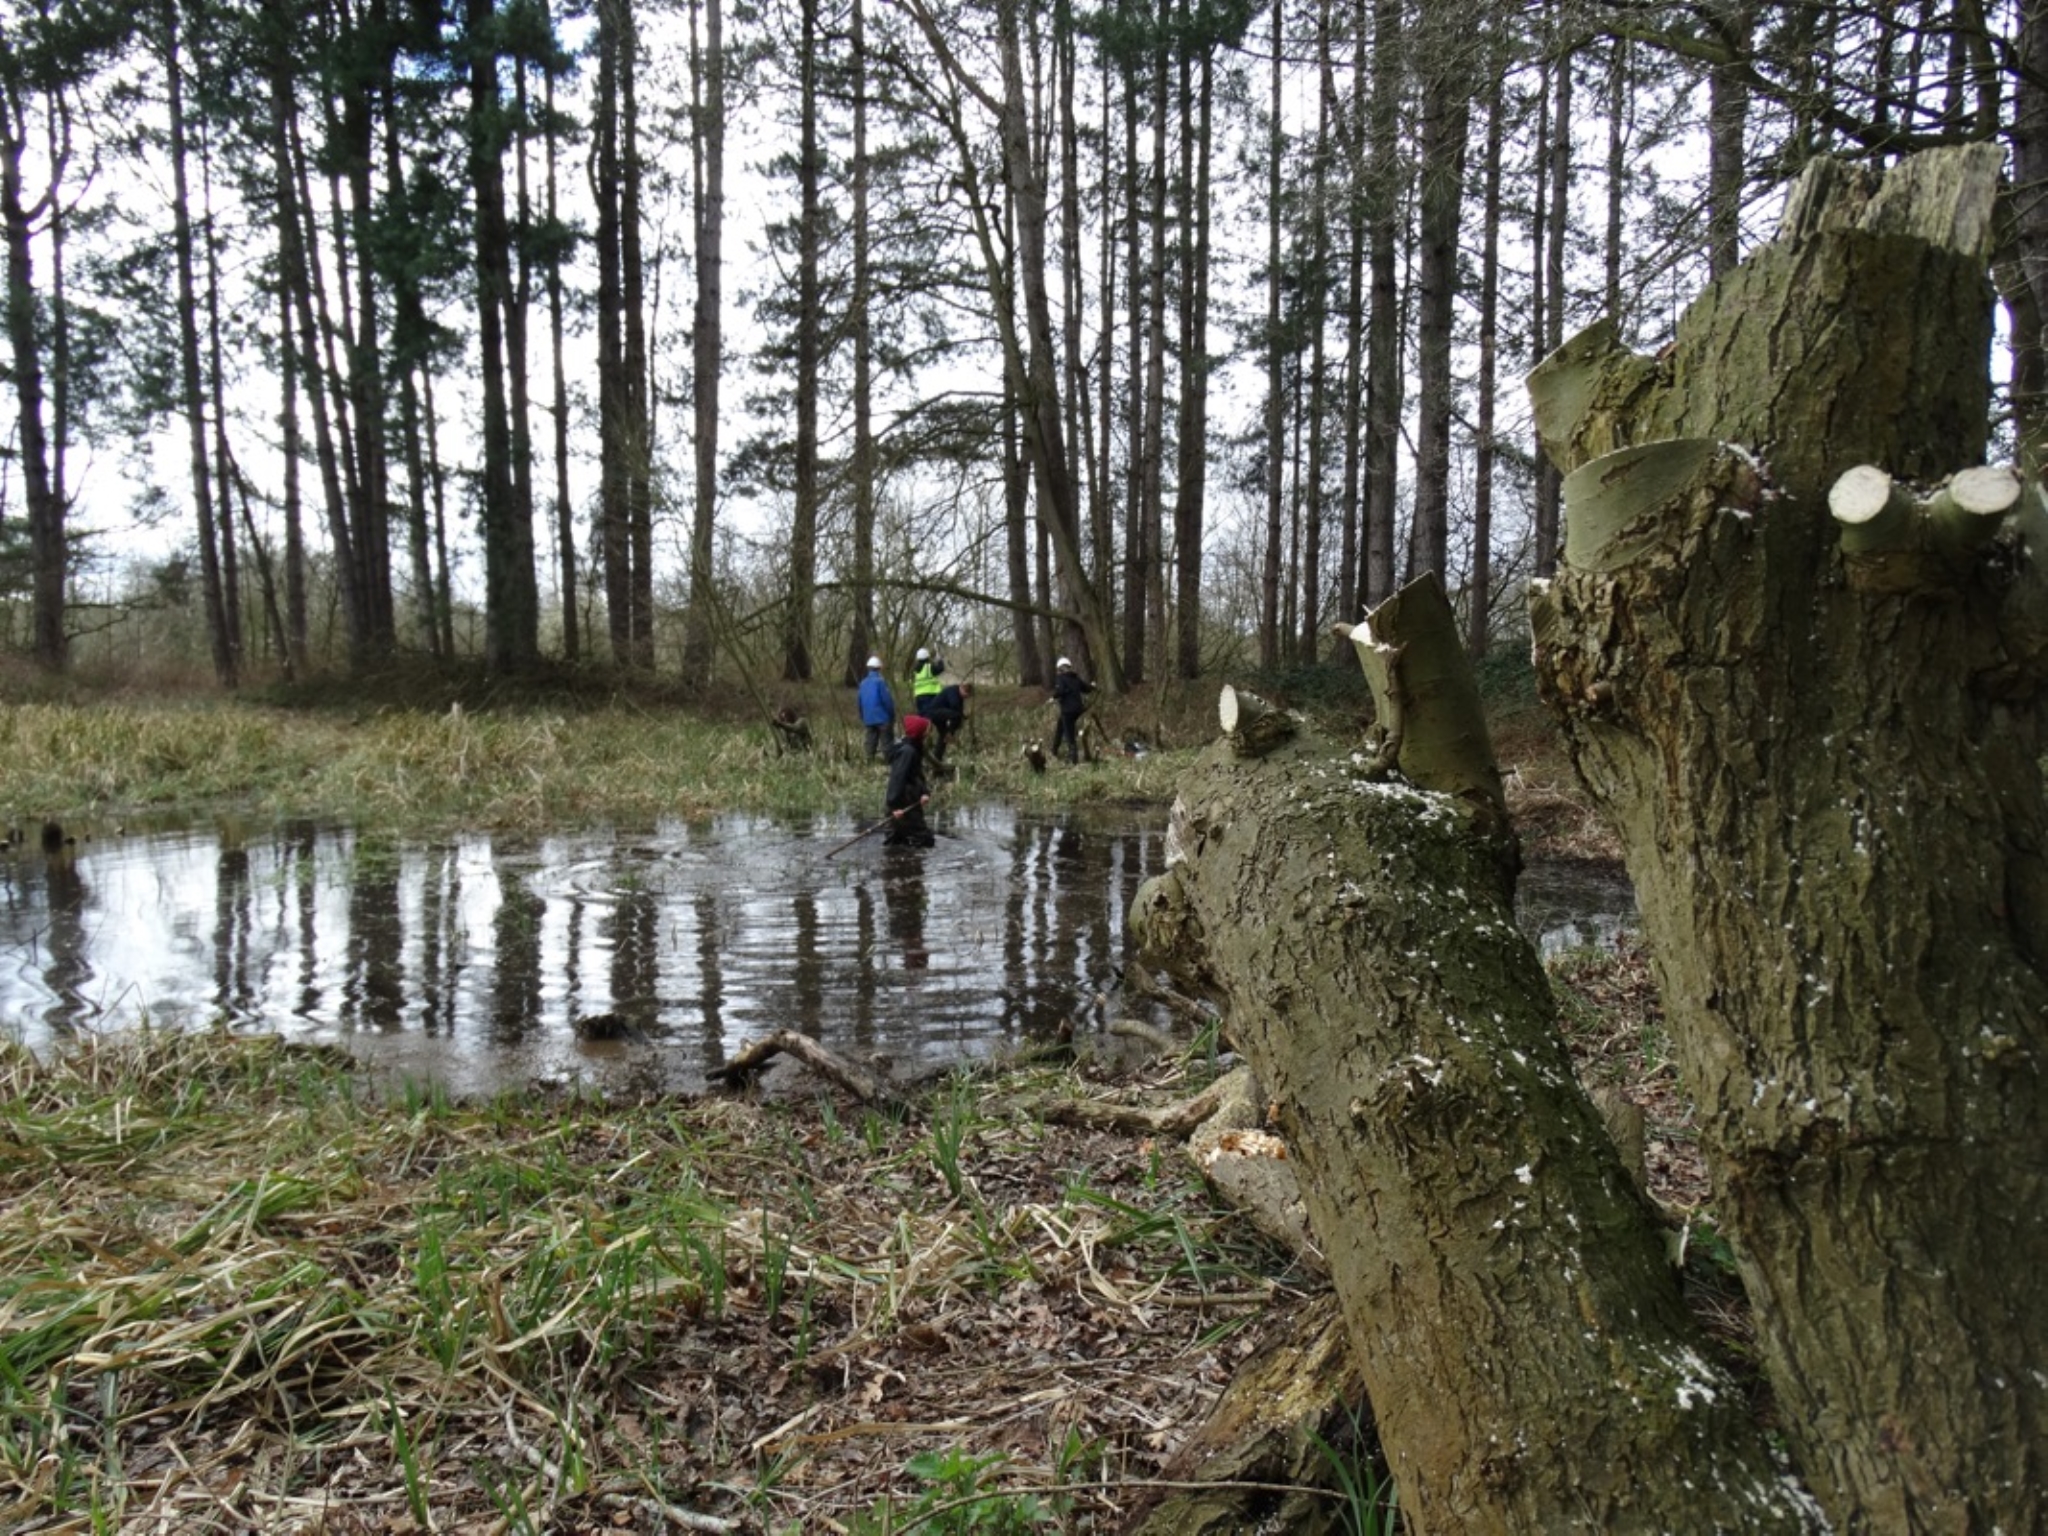 A photo from the FoTF Conservation Event - March 2019 - Clearance work around, and in, the ponds at Harling Woods, Harling : A photo of one of the ponds at Harling Woods, with volunteers working on the far edge